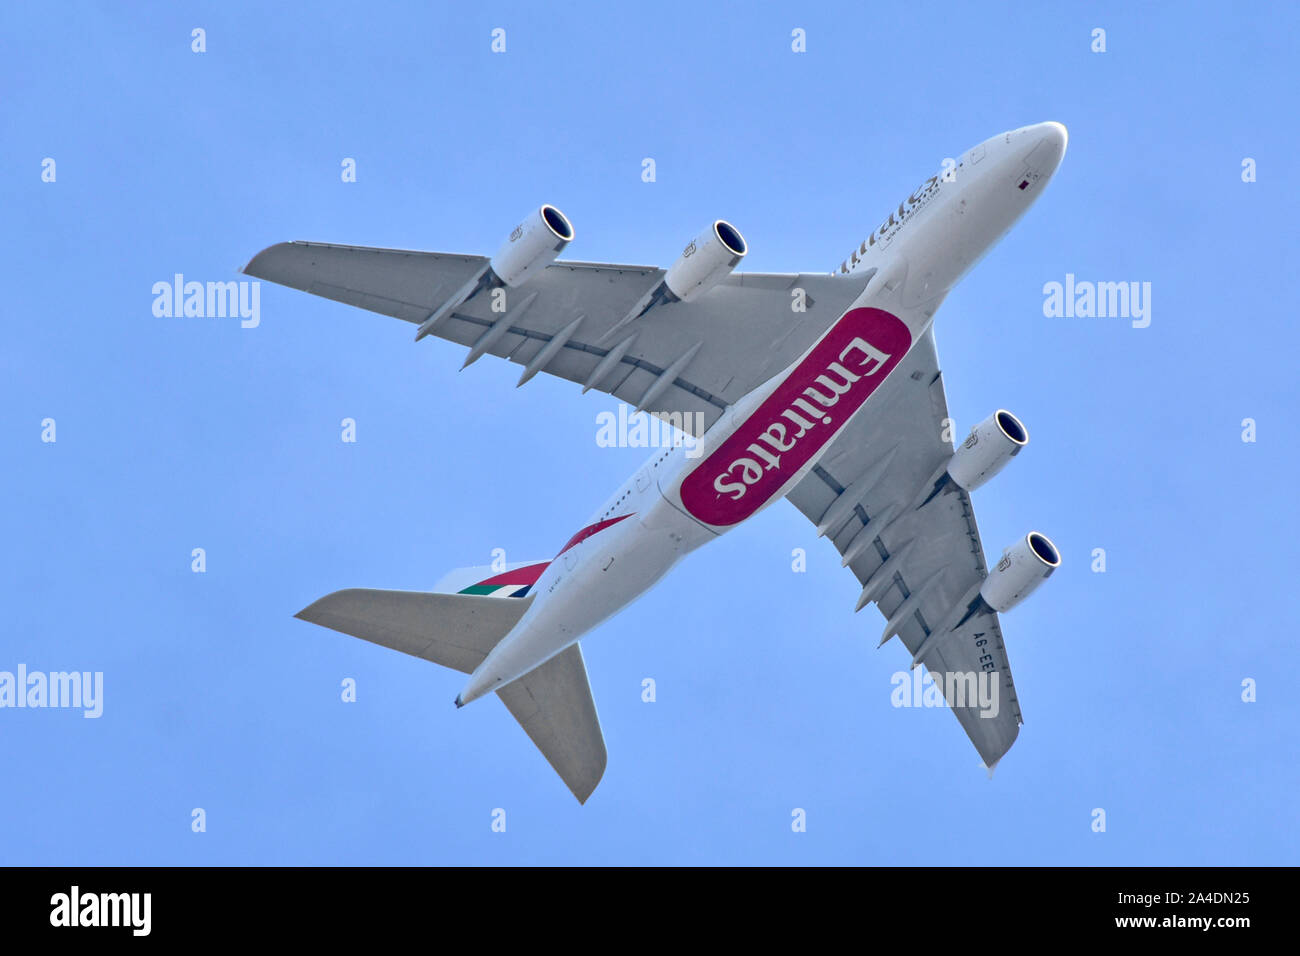 Close up underside view of Emirates airline business Airbus A380 800  jet airplane aeroplane in flight plane low over London on Heathrow approach UK Stock Photo